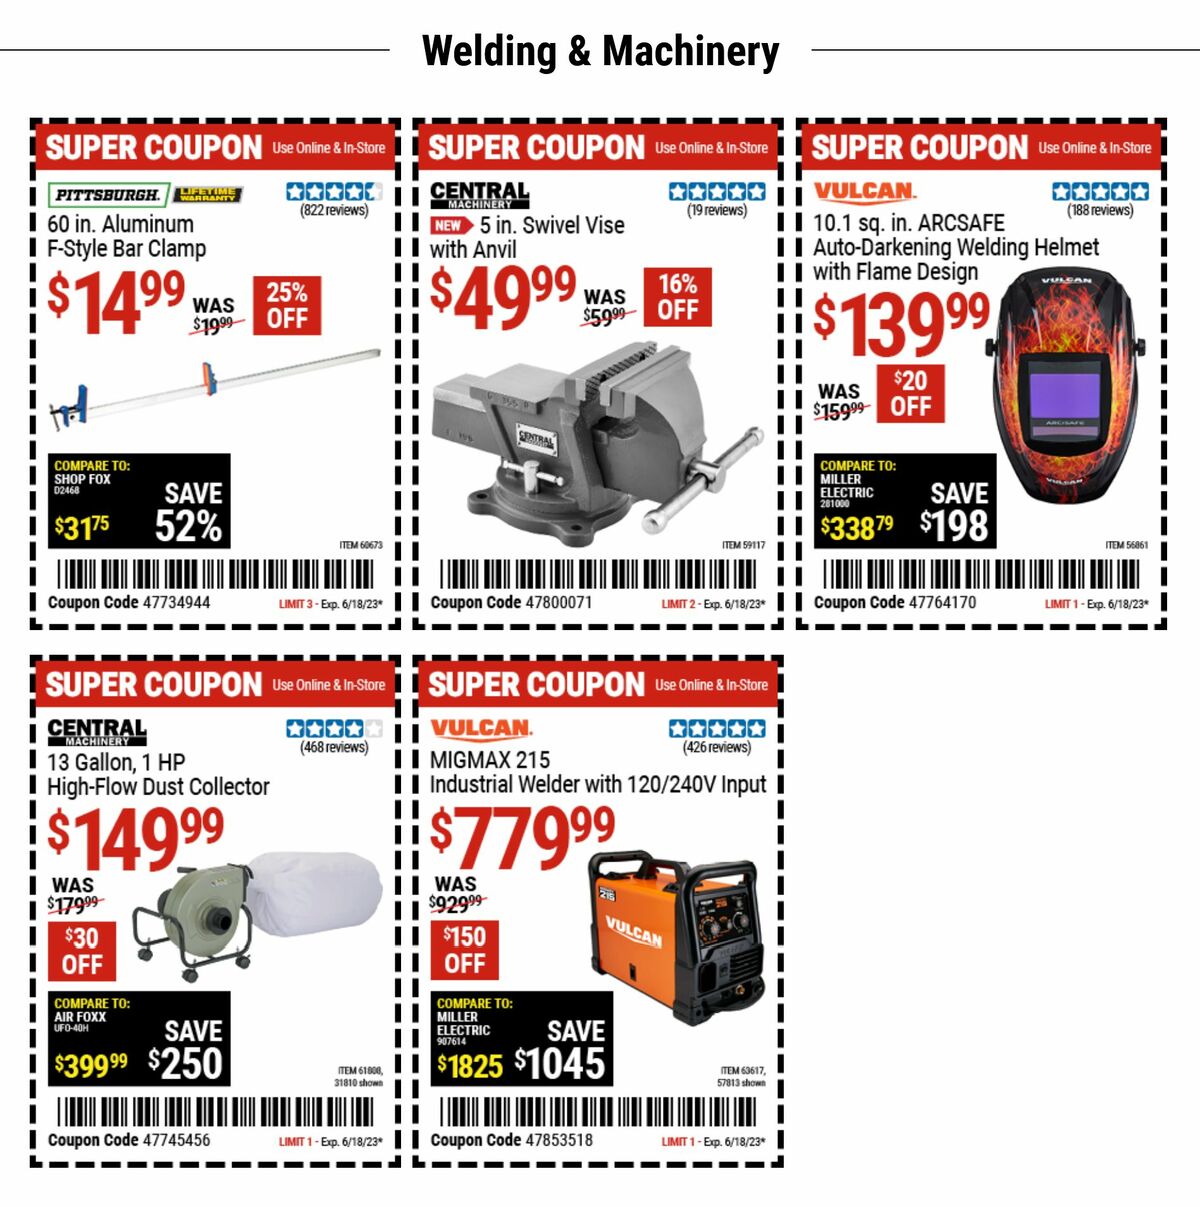 Harbor Freight Tools Weekly Ad from June 5